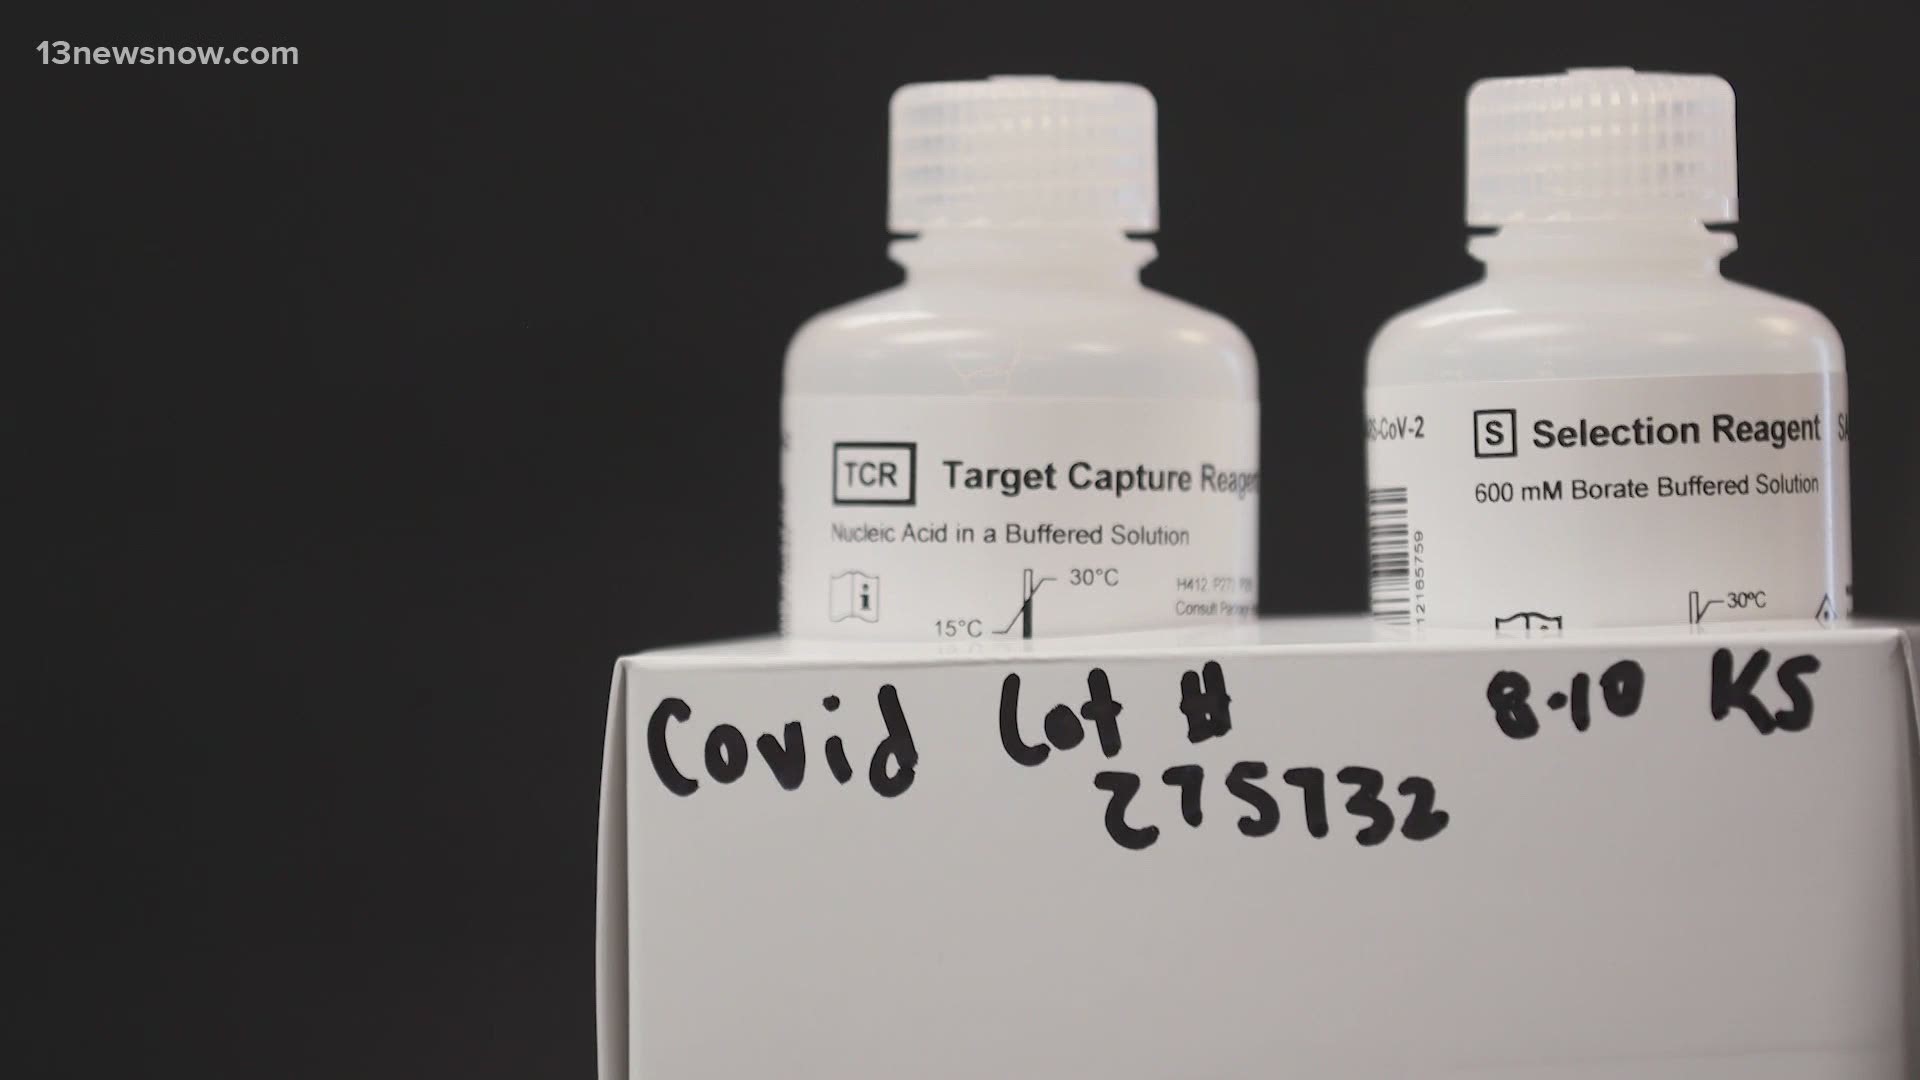 It can take up to 10 days to get a COVID-19 test result, often due to a limited allocation of reagents, the chemicals or solutions used to determine a test result.